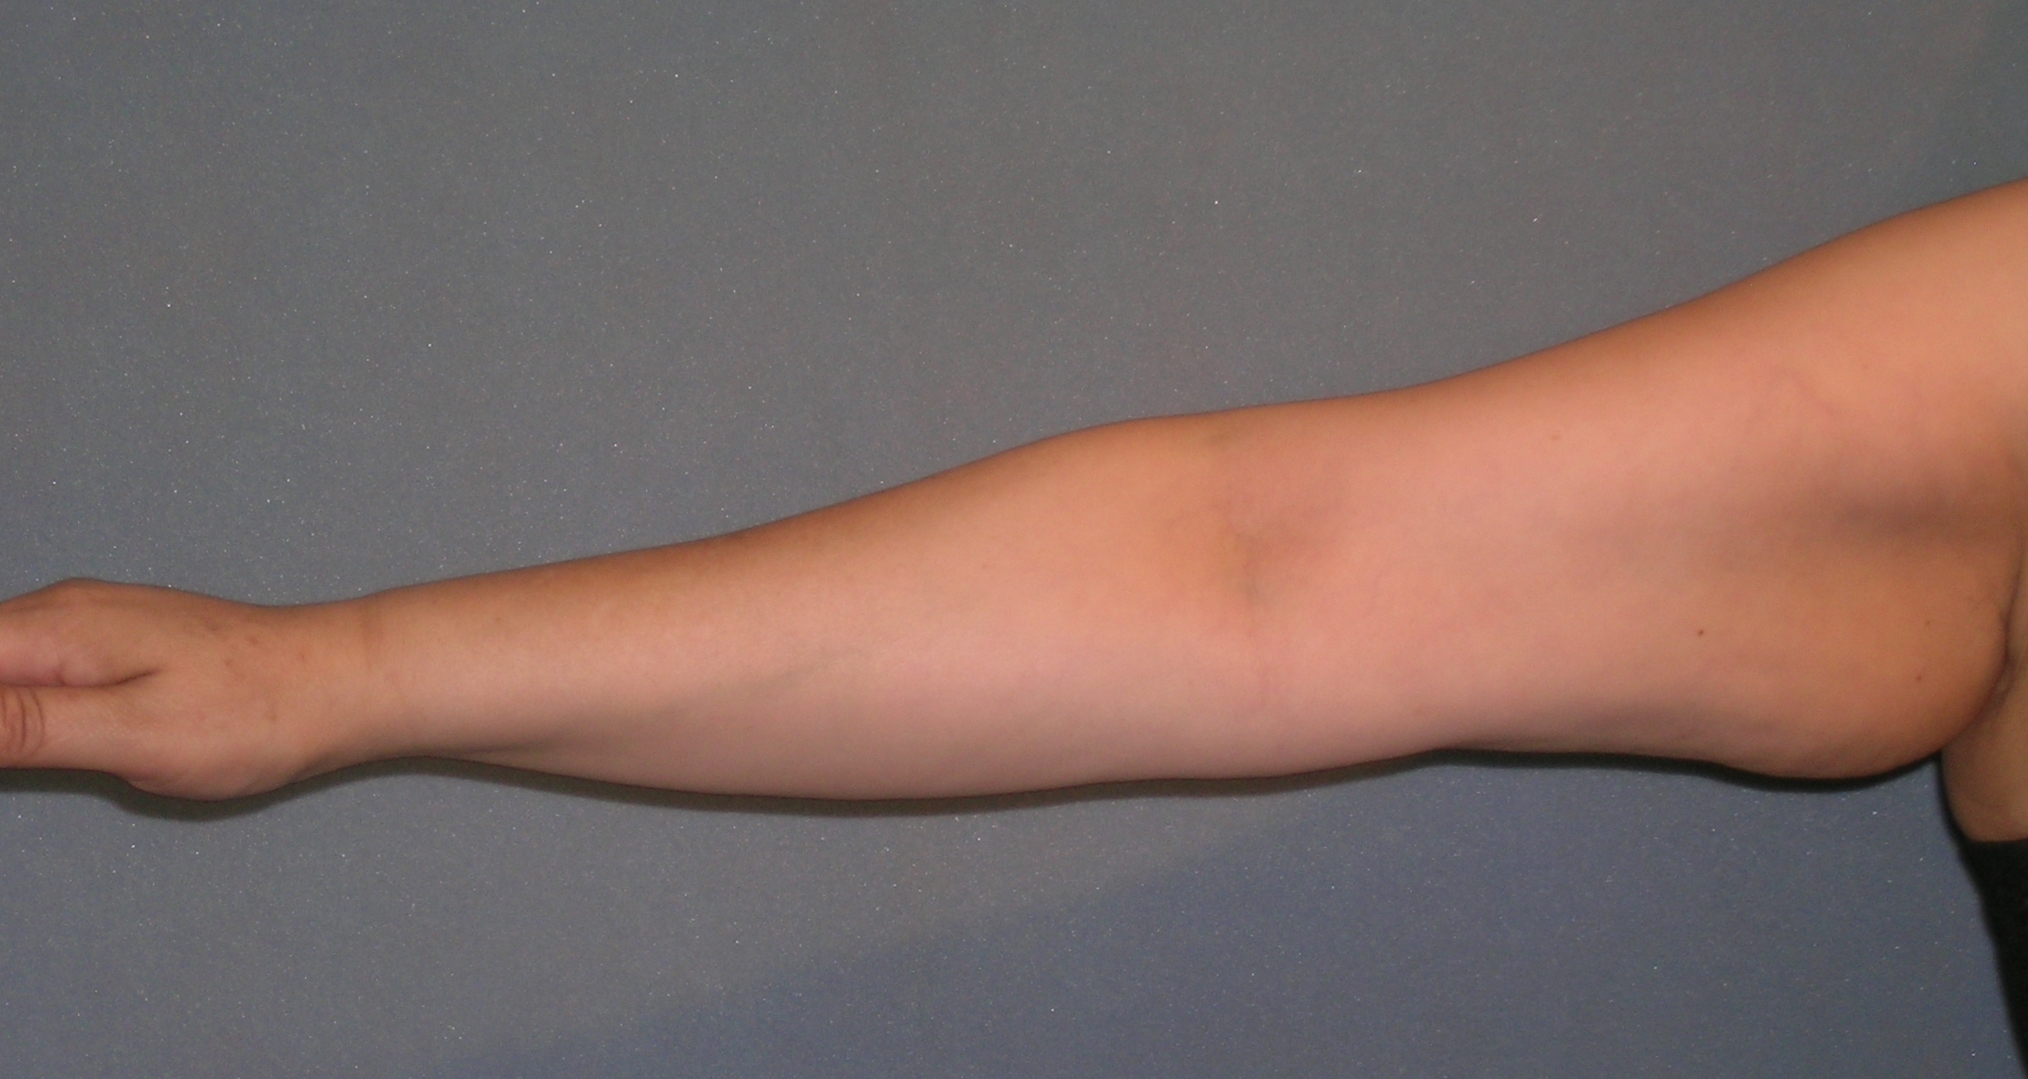 Arm Lift Before and After Photos | Dr. Balakhani